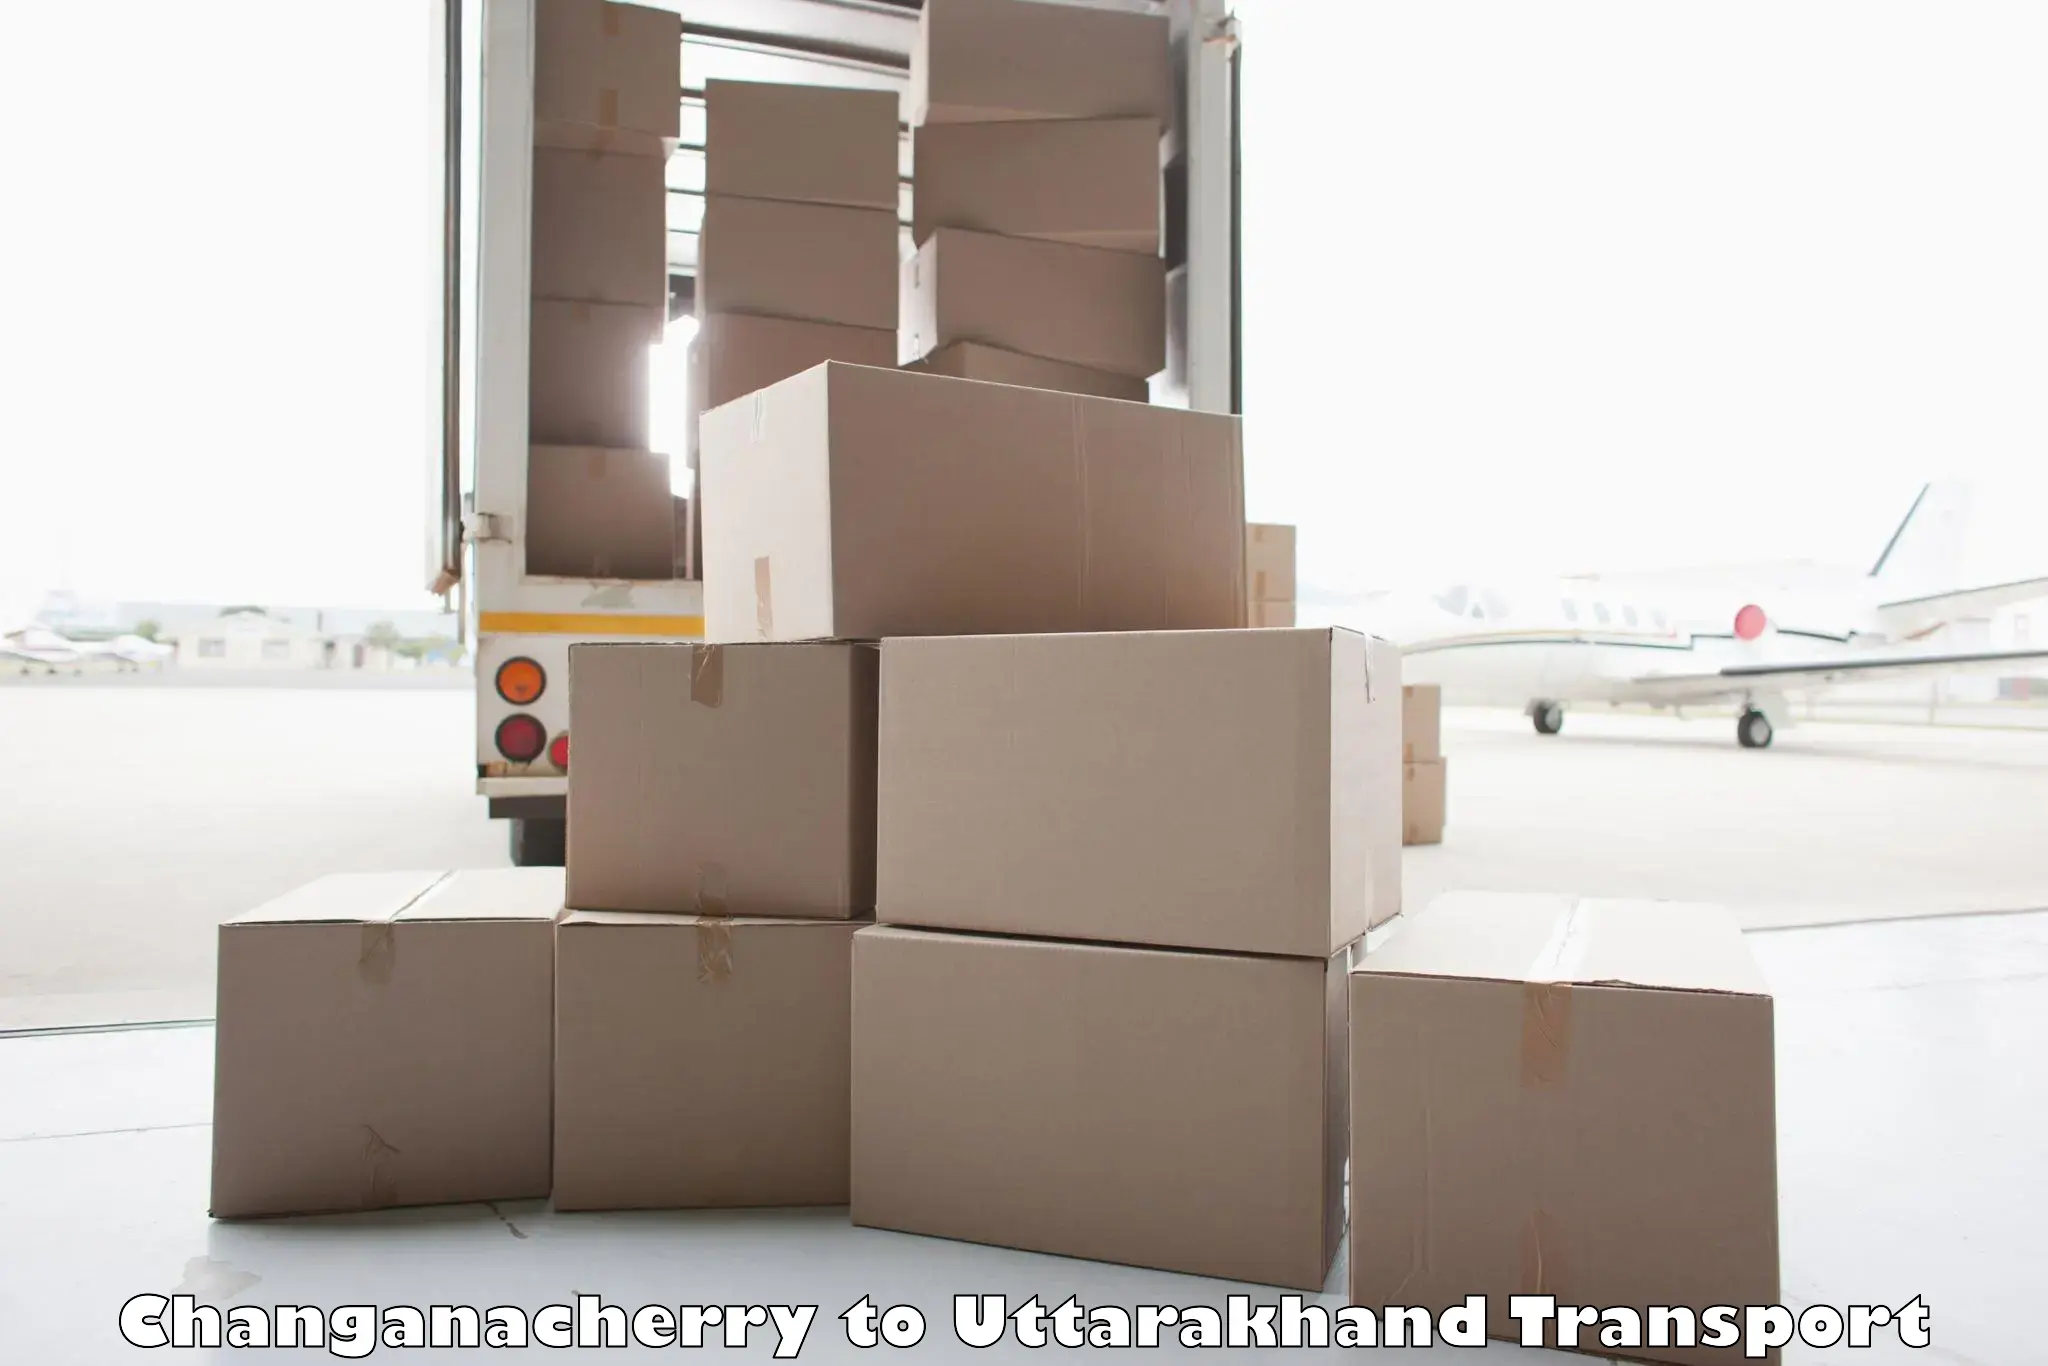 Daily parcel service transport Changanacherry to Tanakpur